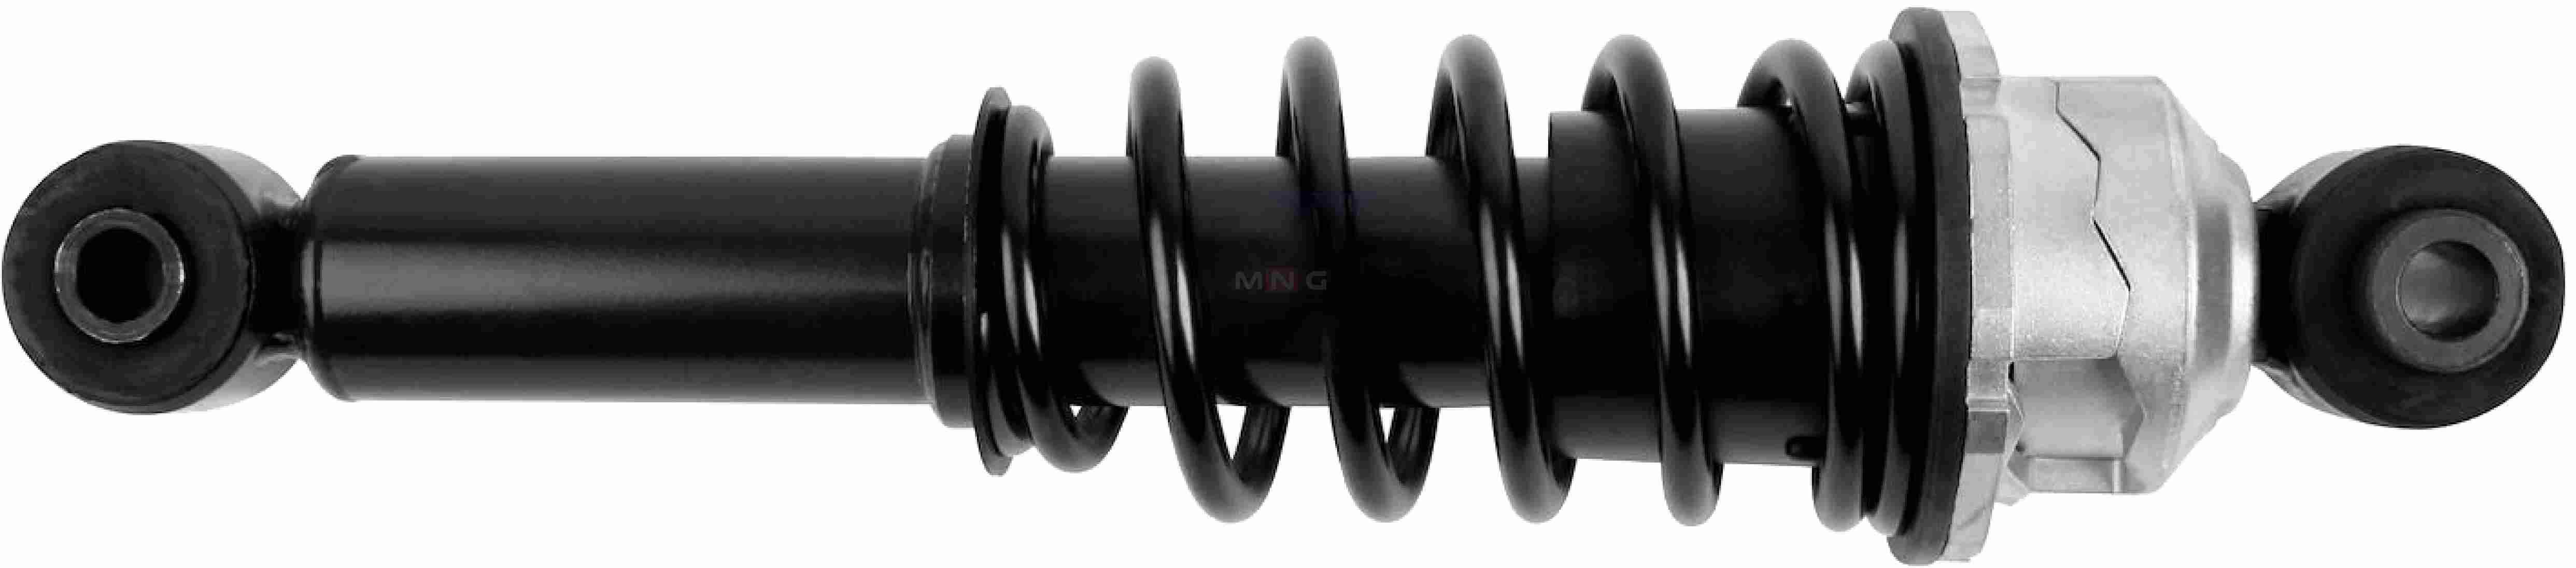 504068625-MNG-SHOCK-ABSORBER-IVECO